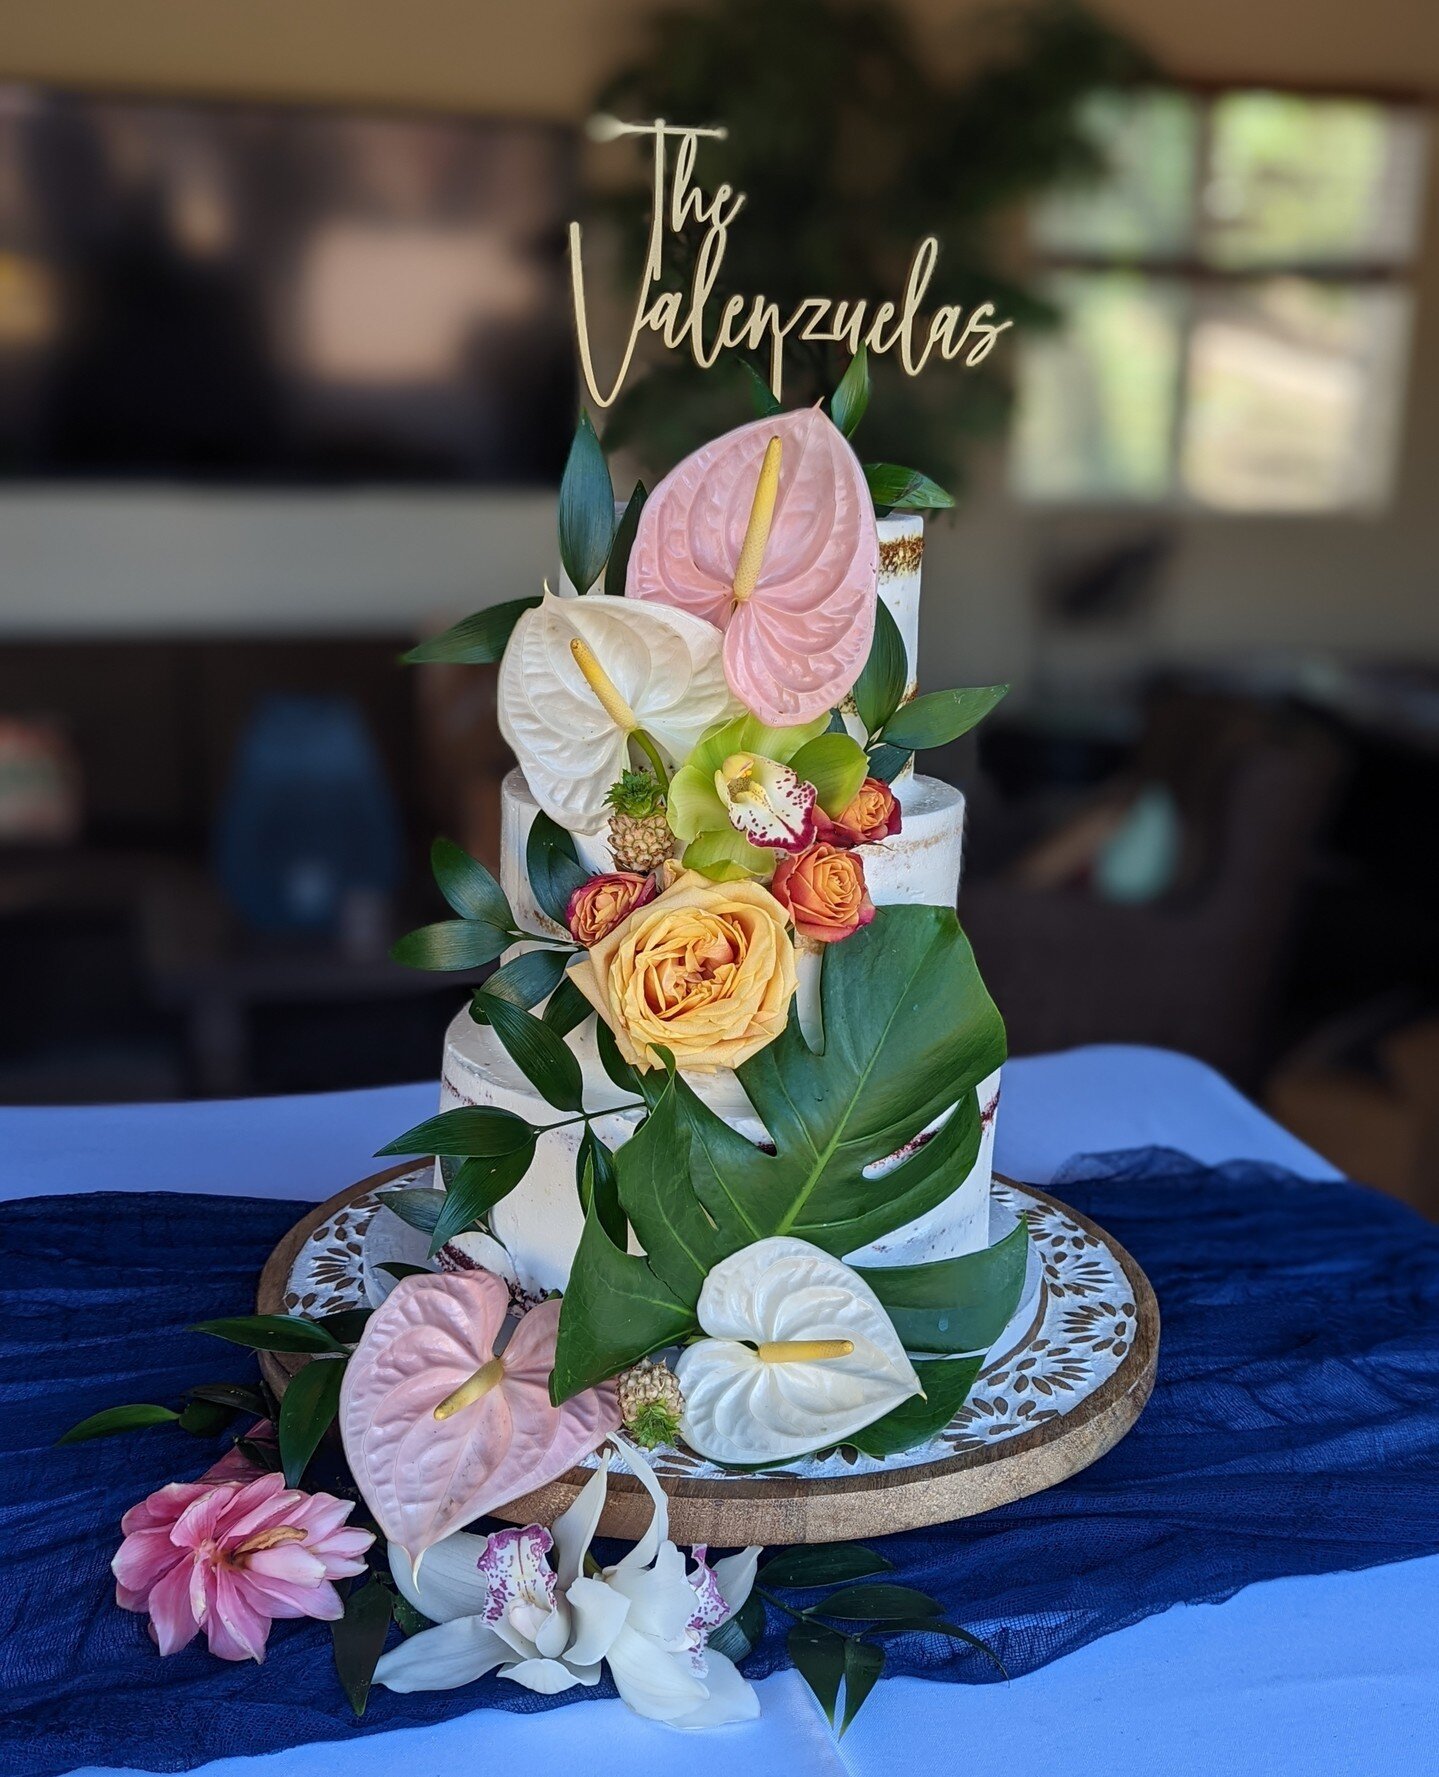 Tropical floral wedding cake ⁠
⁠
⁠
Have an upcoming wedding? Call us at⁠
(951) 699-2399 for a wedding consultation⁠
or visit our website at www.1914bakery.com for more info!⁠
⁠
#dessert #cakedesigner #flowers #temeculawine #chocolate #food #customcak